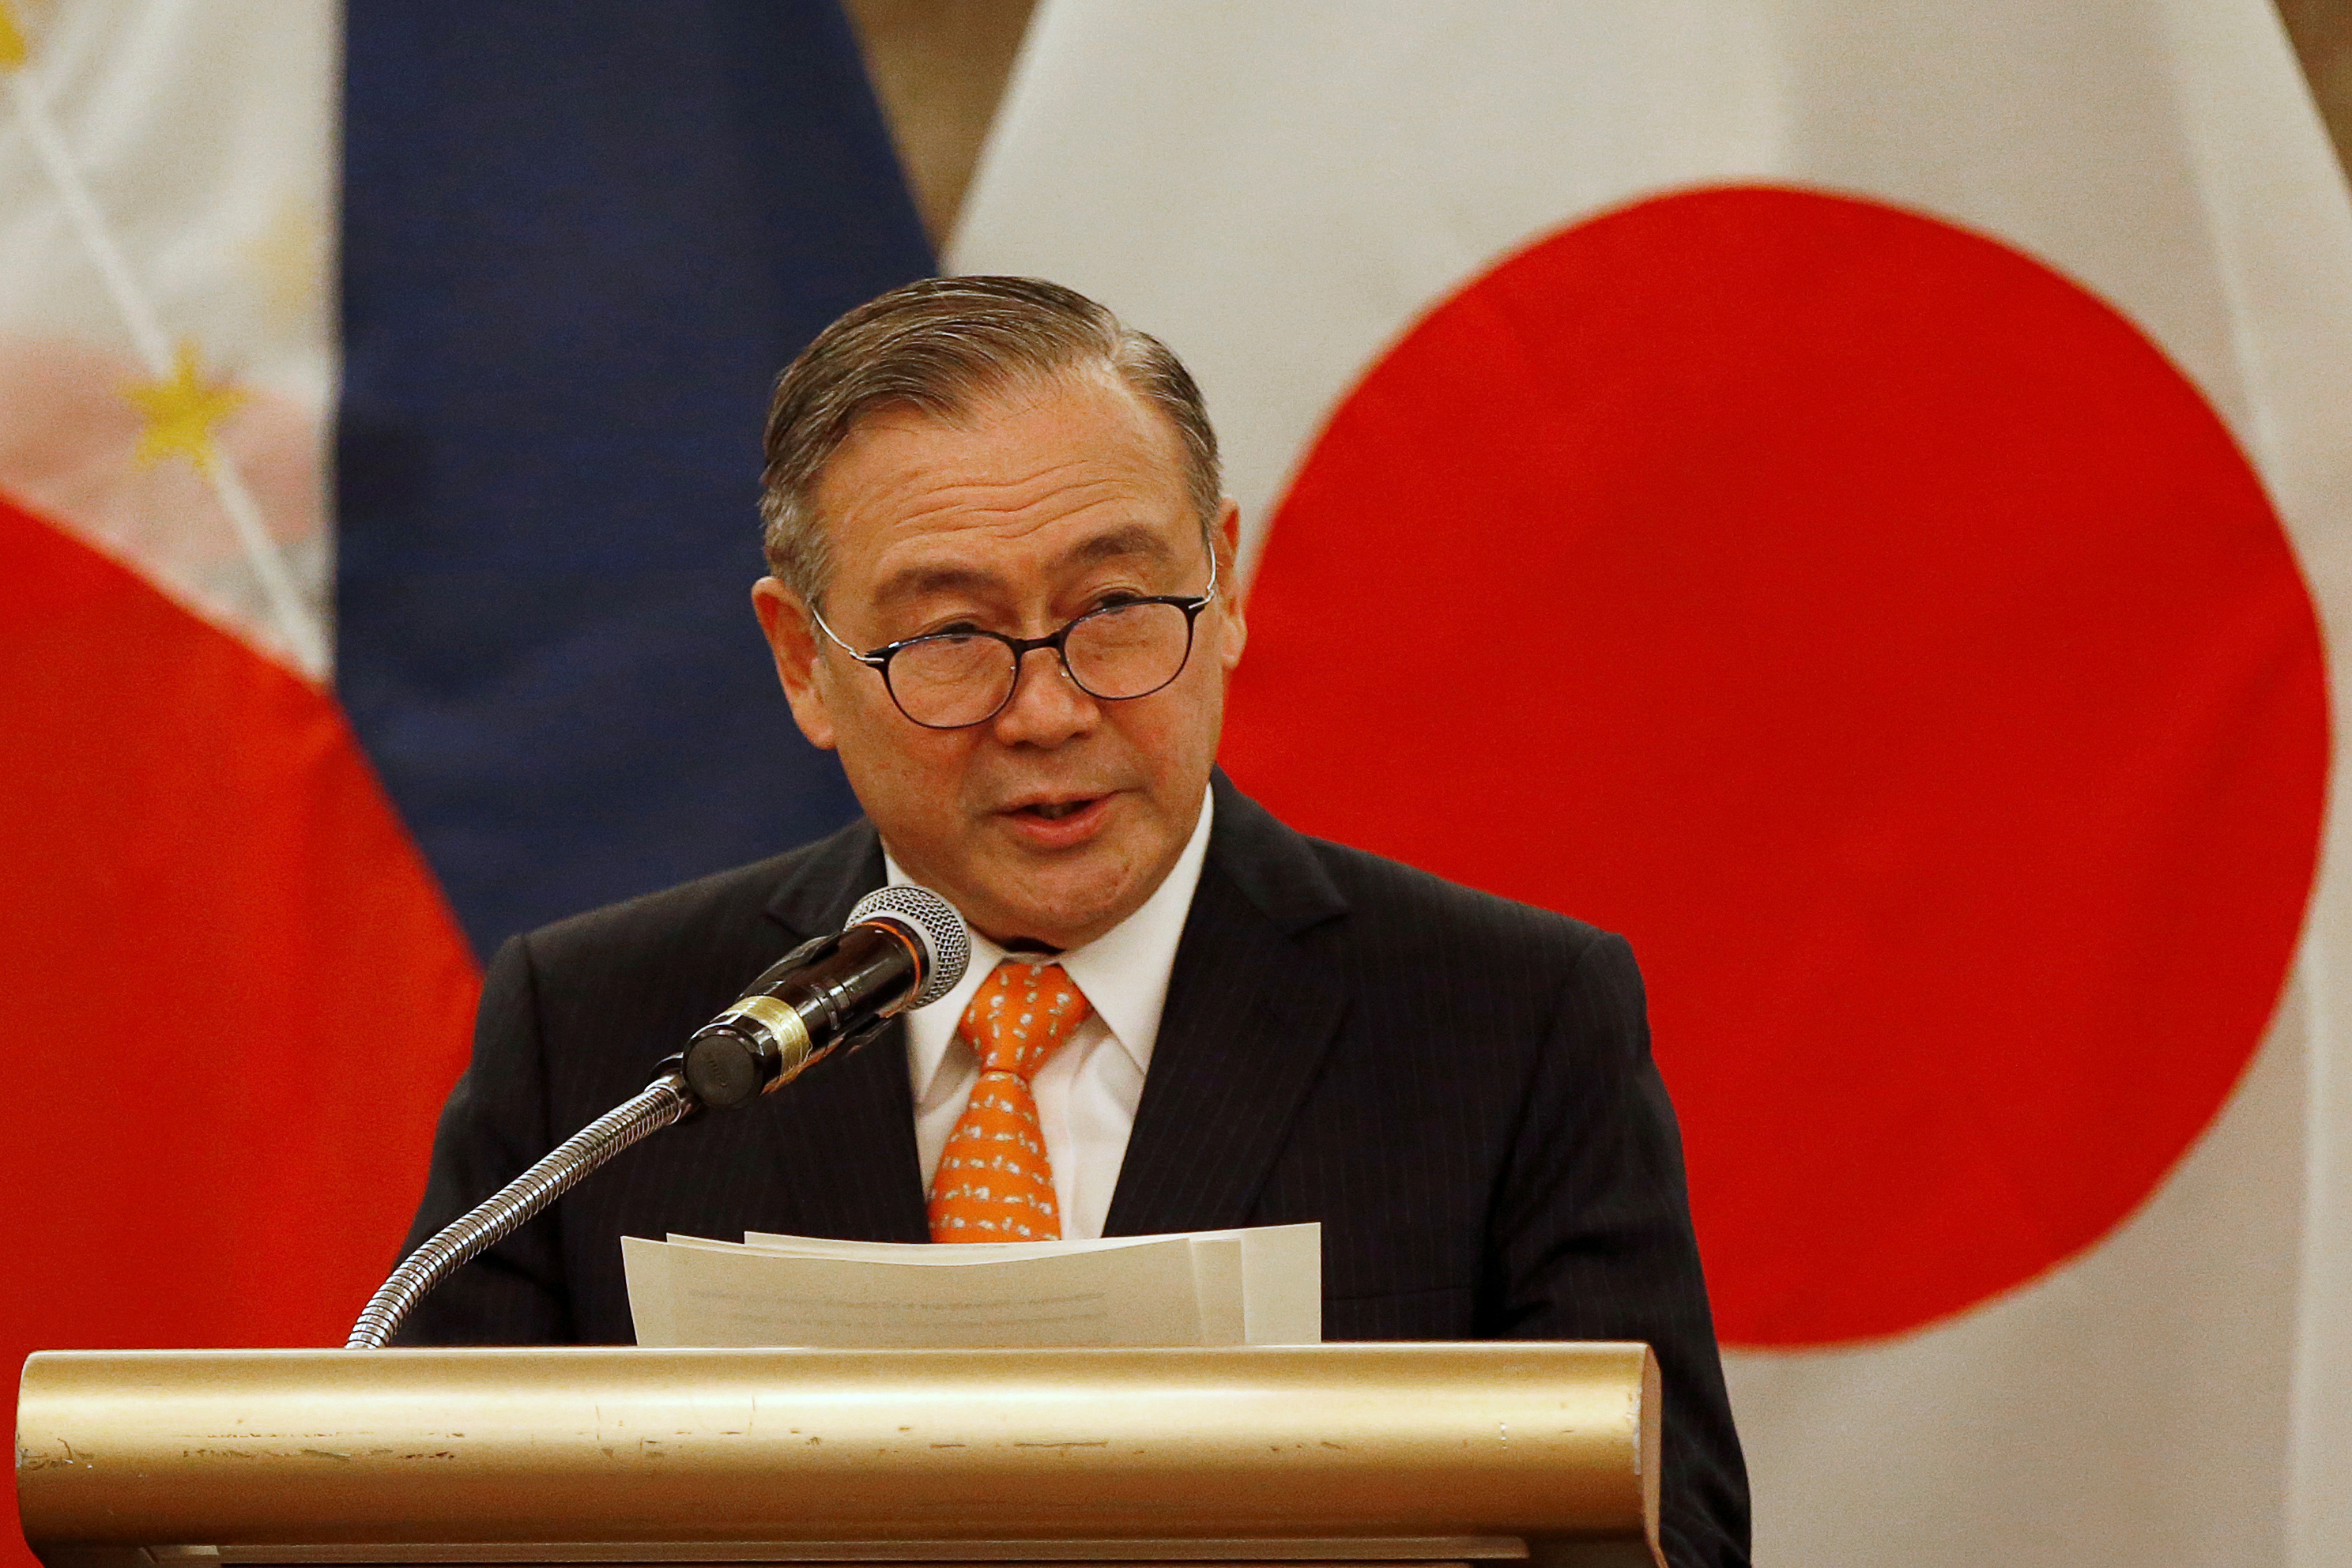 Philippines' Foreign Affairs Secretary Teodoro Locsin Jr. speaks during a press briefing with Japanese Foreign Minister Toshimitsu Motegi after their meeting in Manila